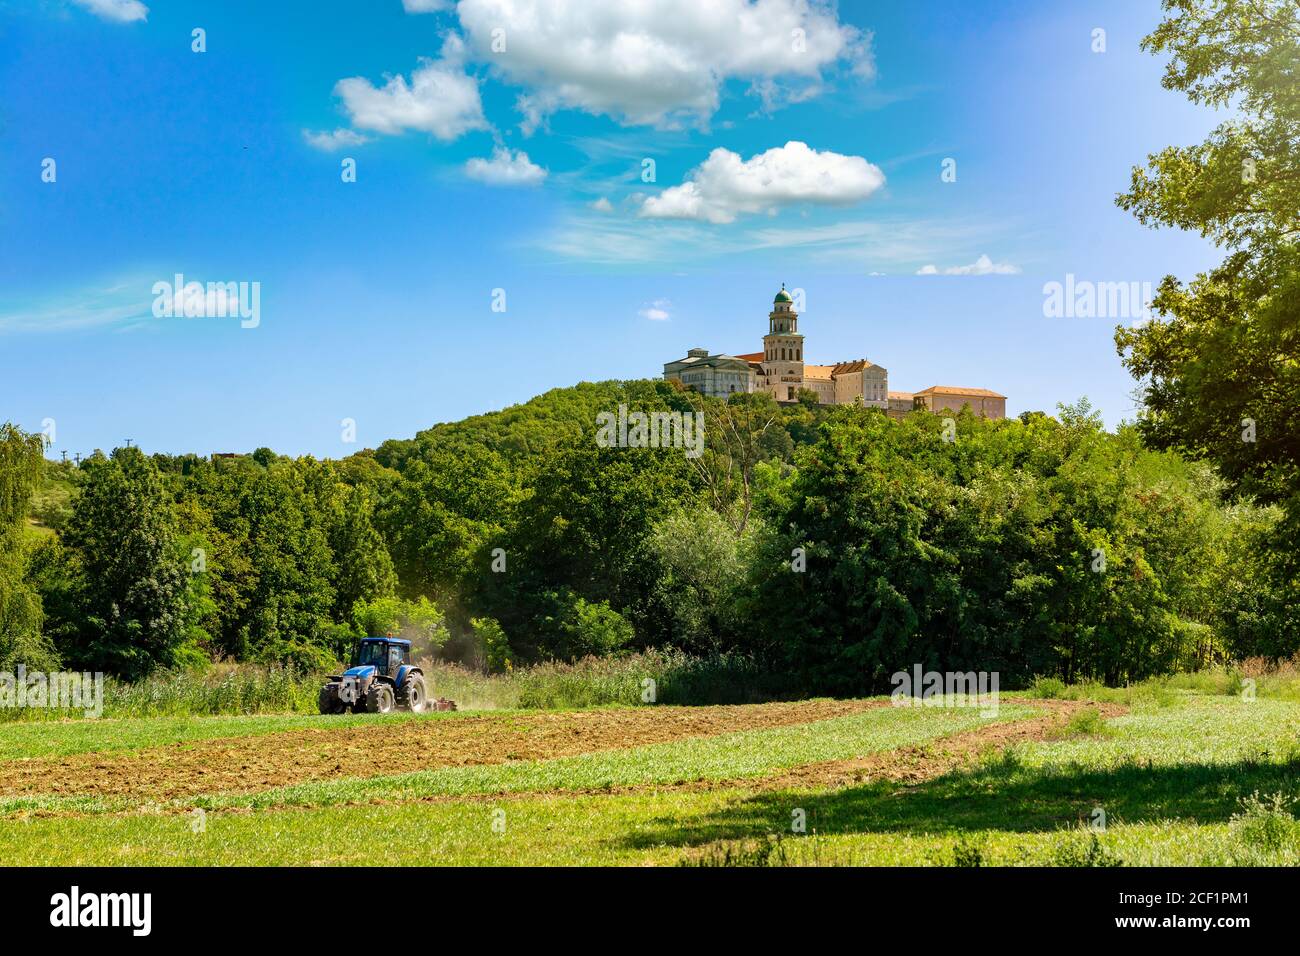 Pannonhalma abbey on the hill with agricultural field and tractor in summer Stock Photo